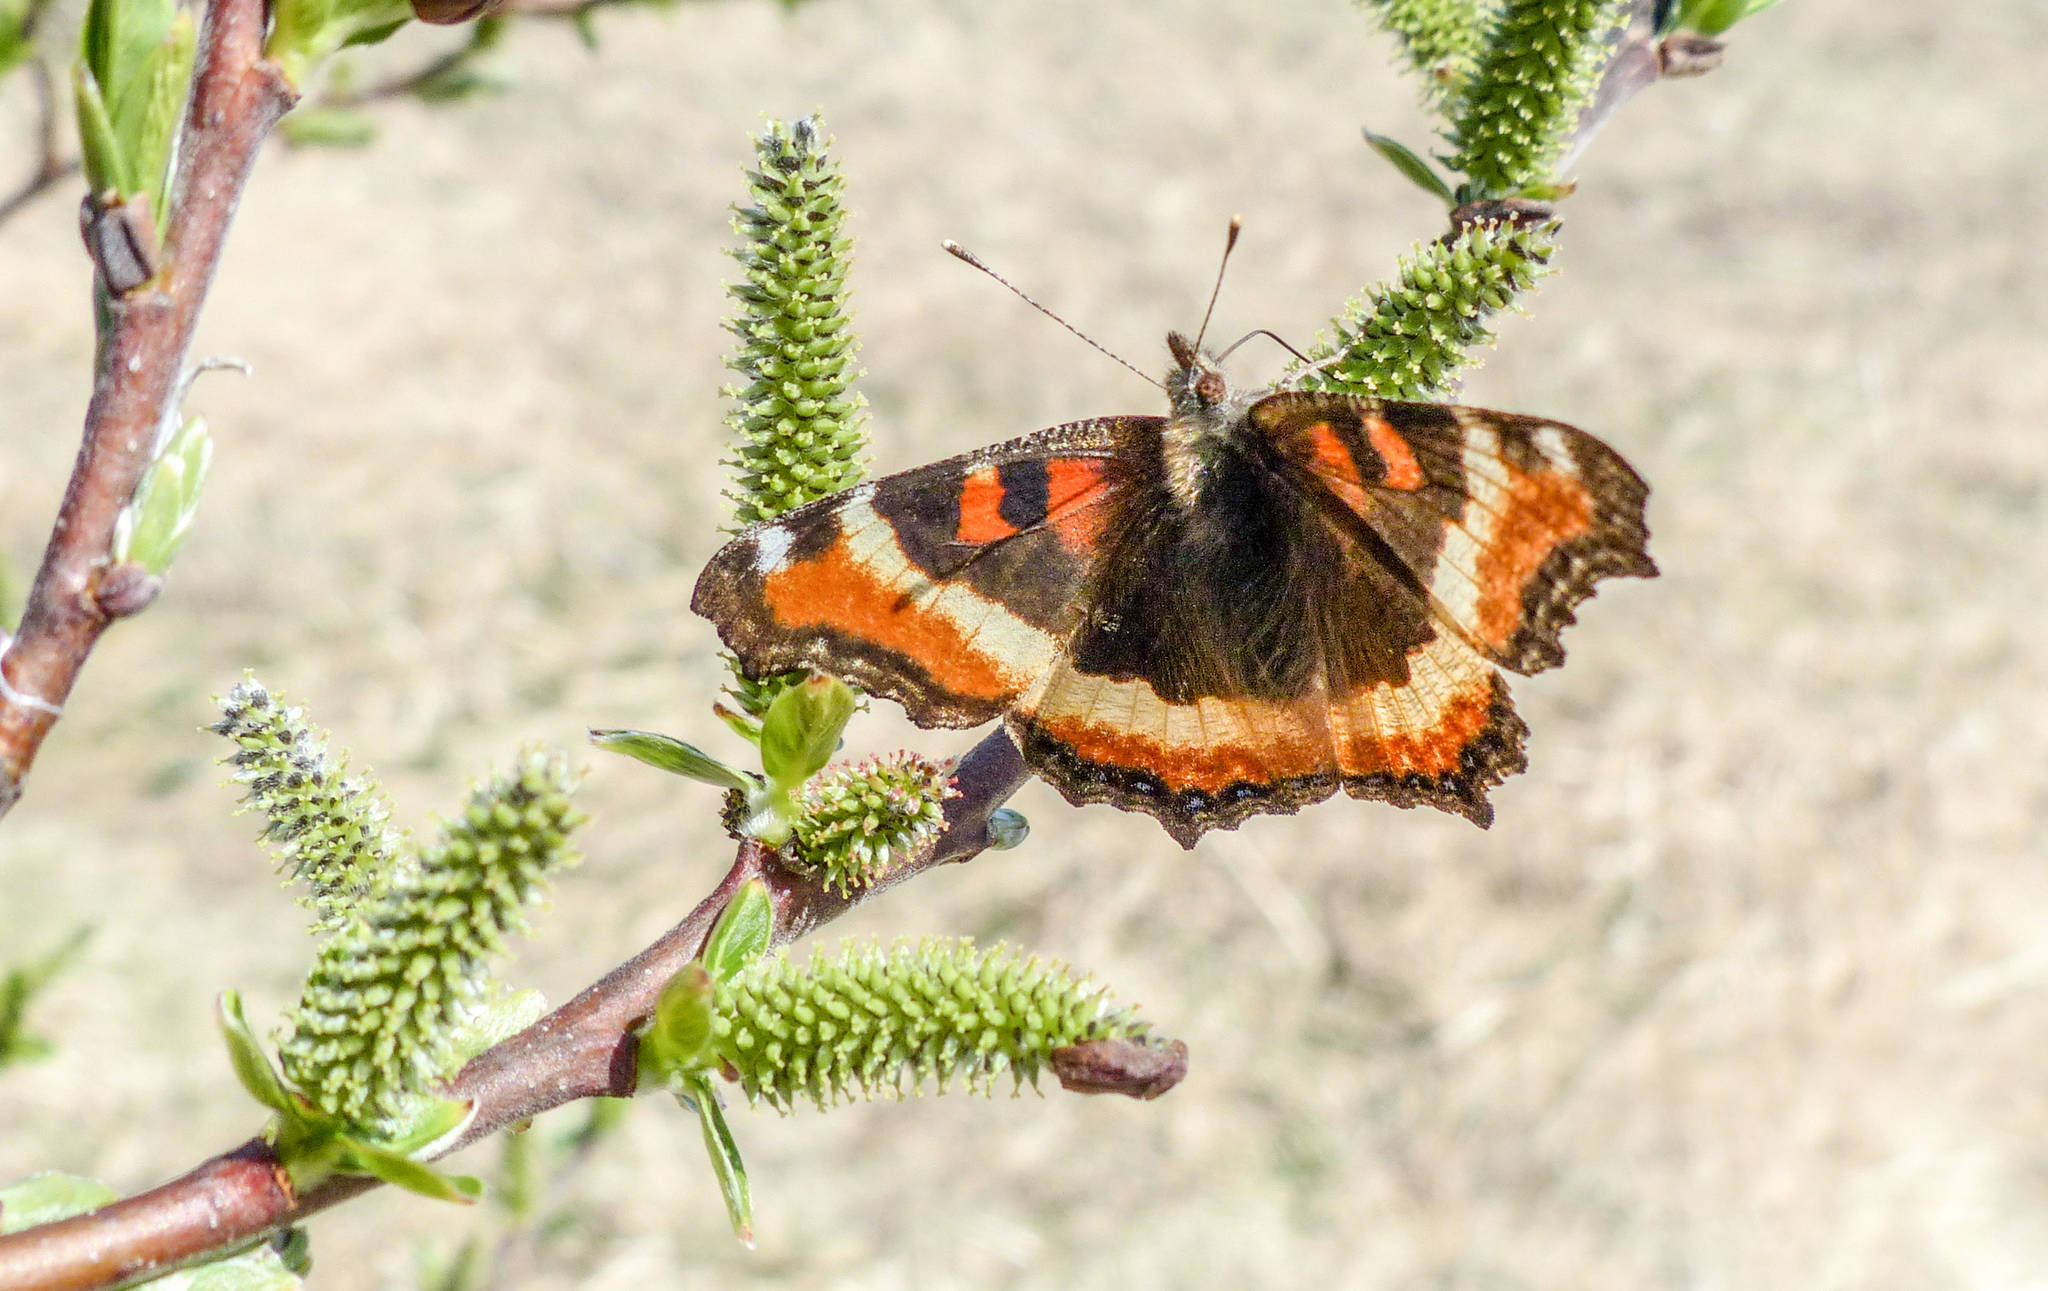 A Milbert’s tortoiseshell butterfly spreads its wings. (Courtesy Photo | Kerry Howard)